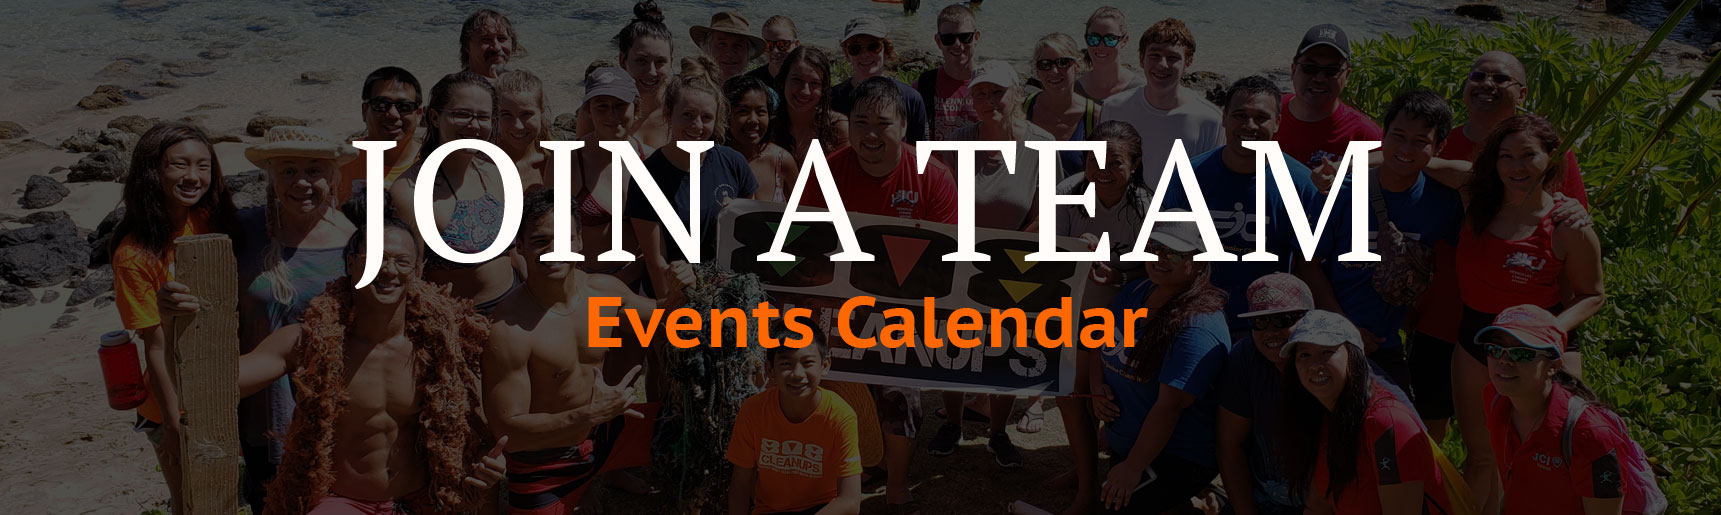 808 Cleanups Join a Team on our Events Calendar